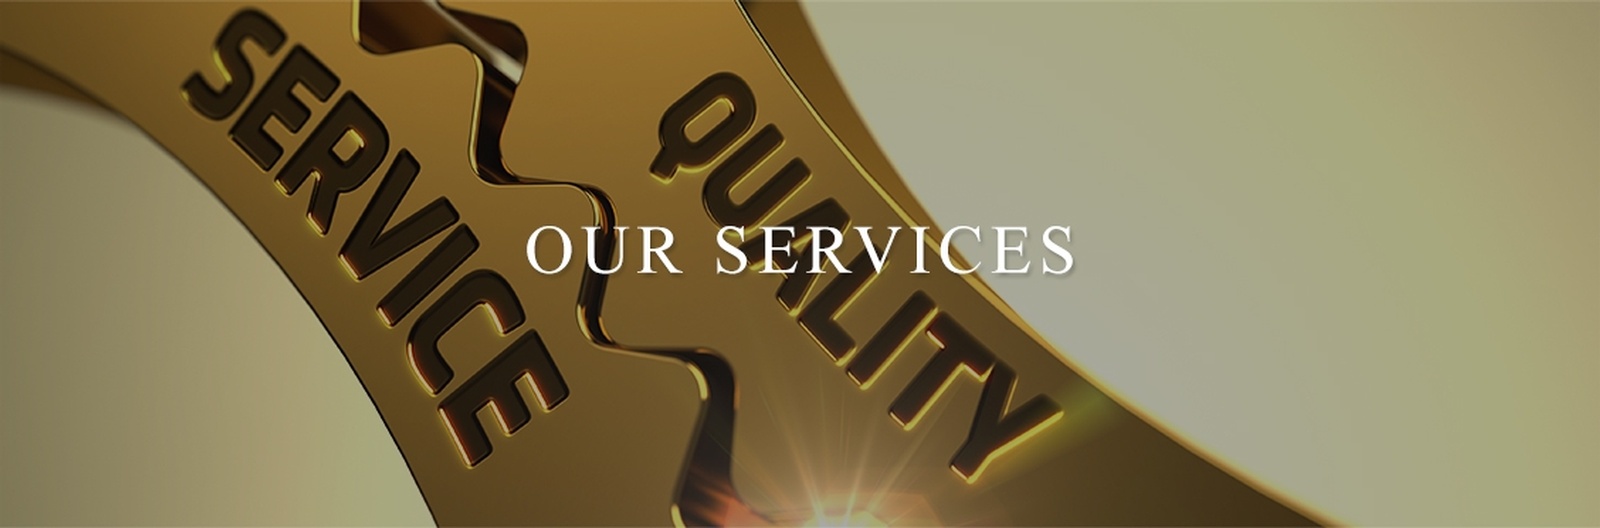 audit services calgary